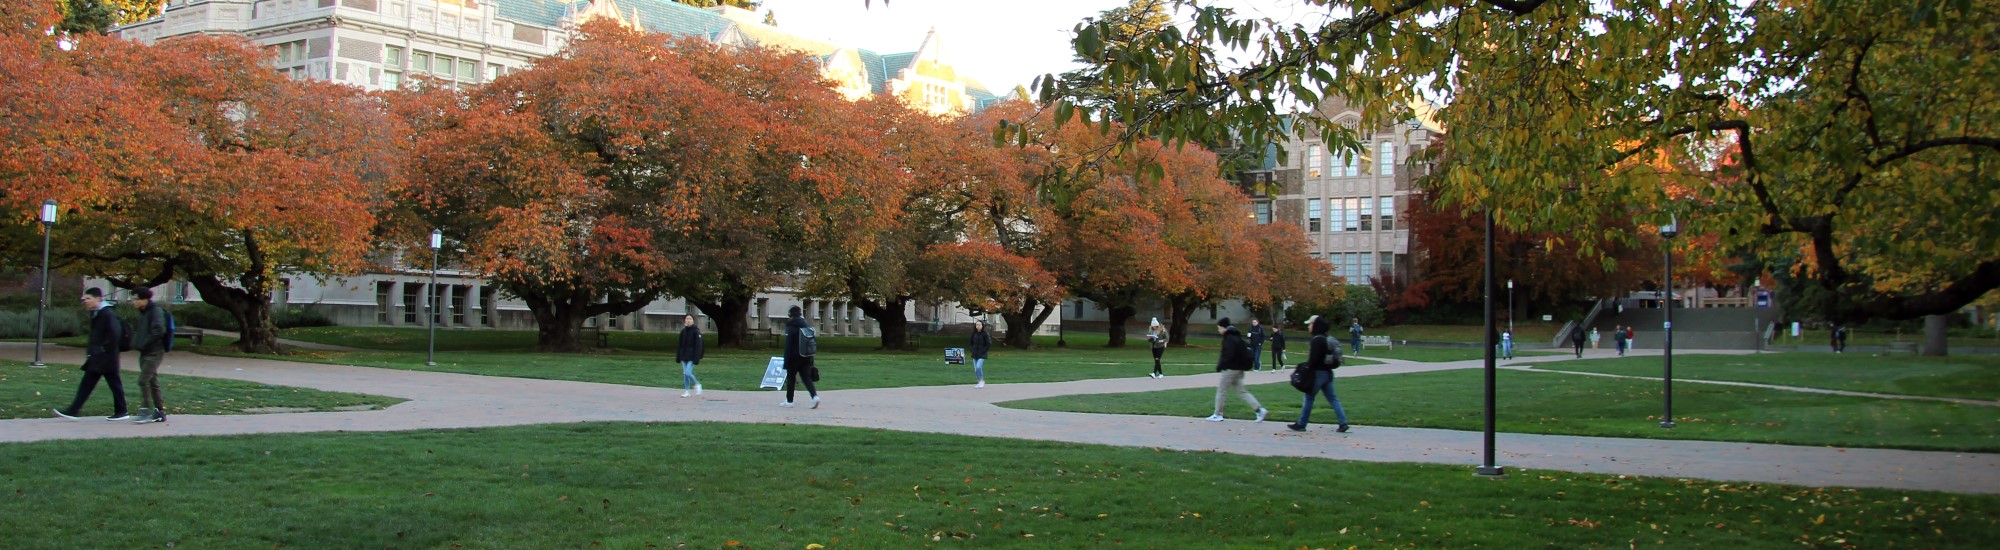 People stroll in the Quad in Fall